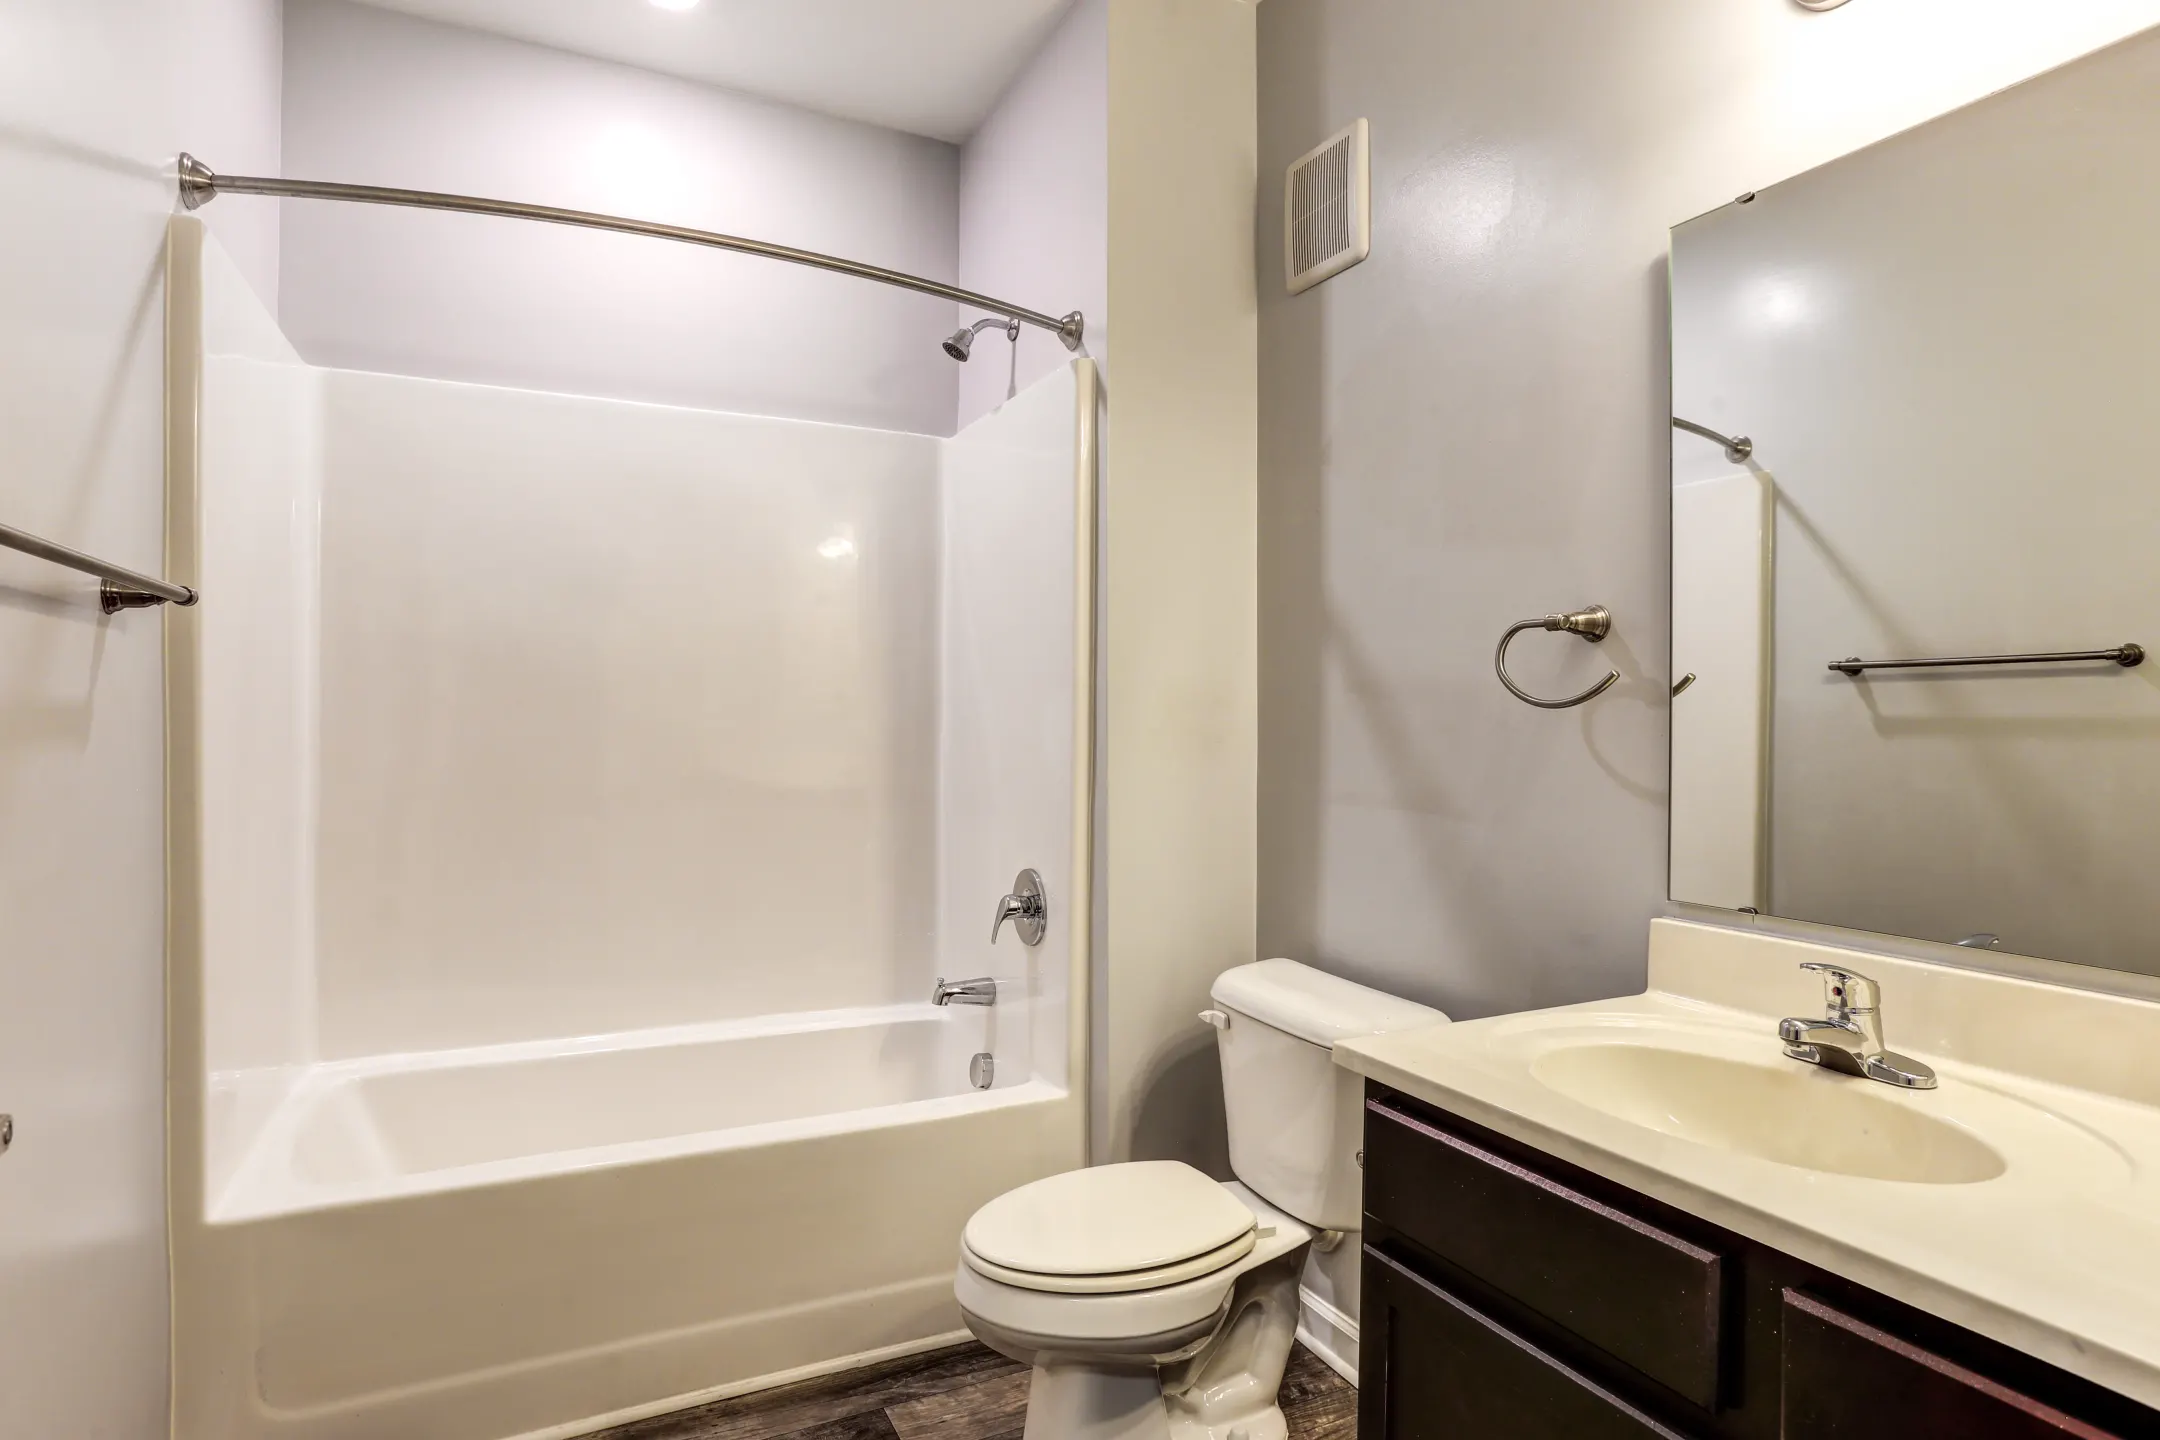 Bathroom - Assembly Apartments - Greenville, SC